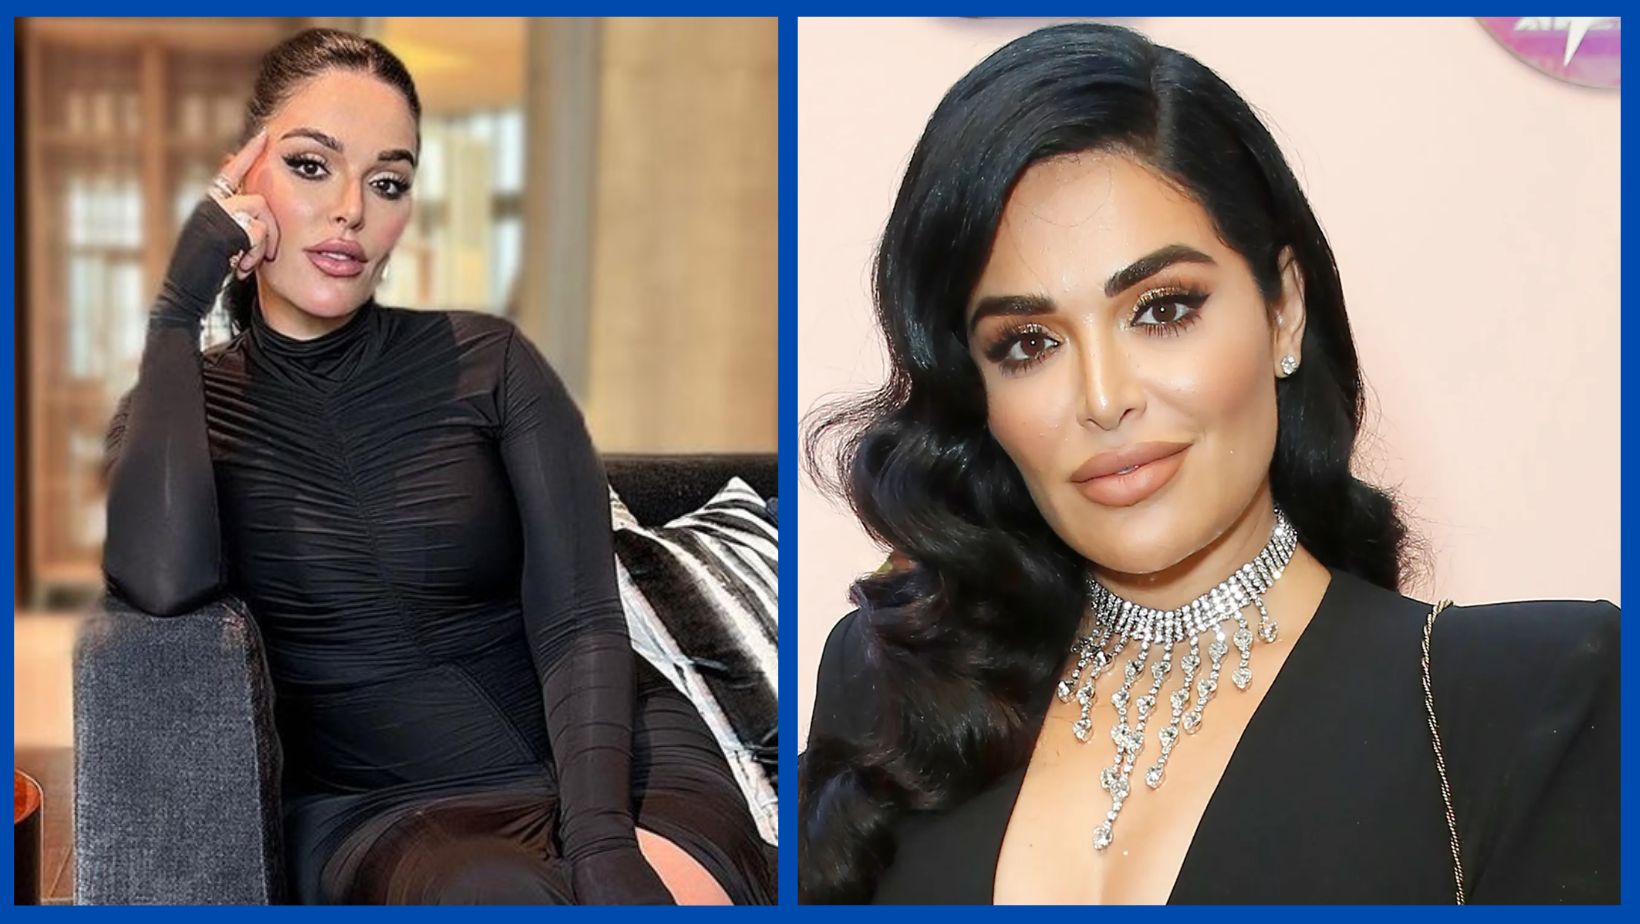 Has Dubai Bling Mona Kattan Done Plastic Surgery? Before And After ...